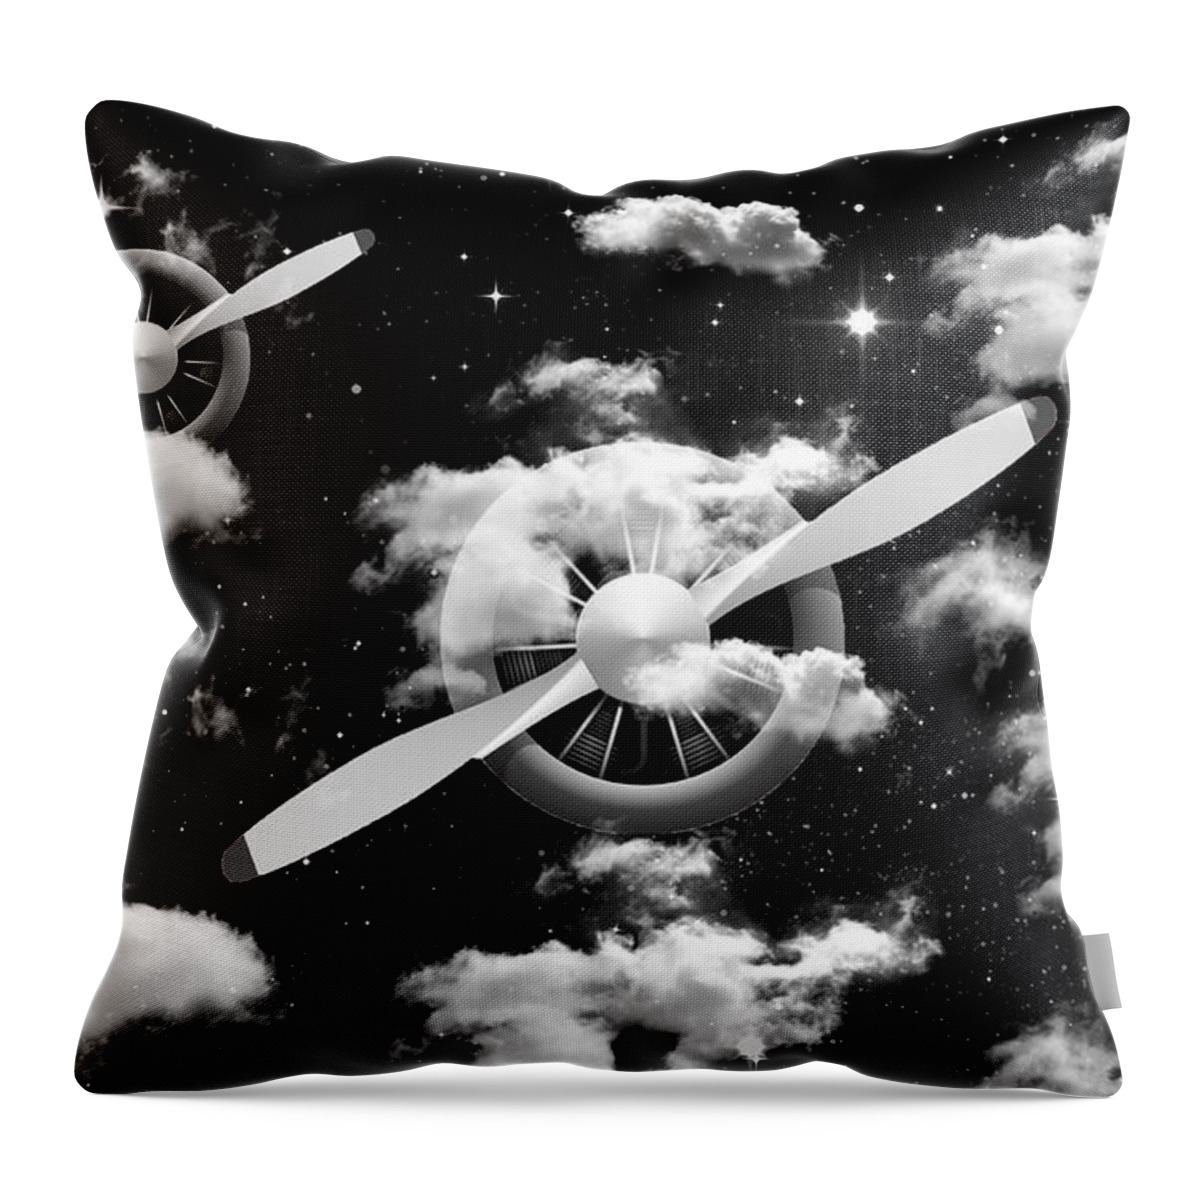 Plane Throw Pillow featuring the mixed media Airplane Fantasy by Marvin Blaine